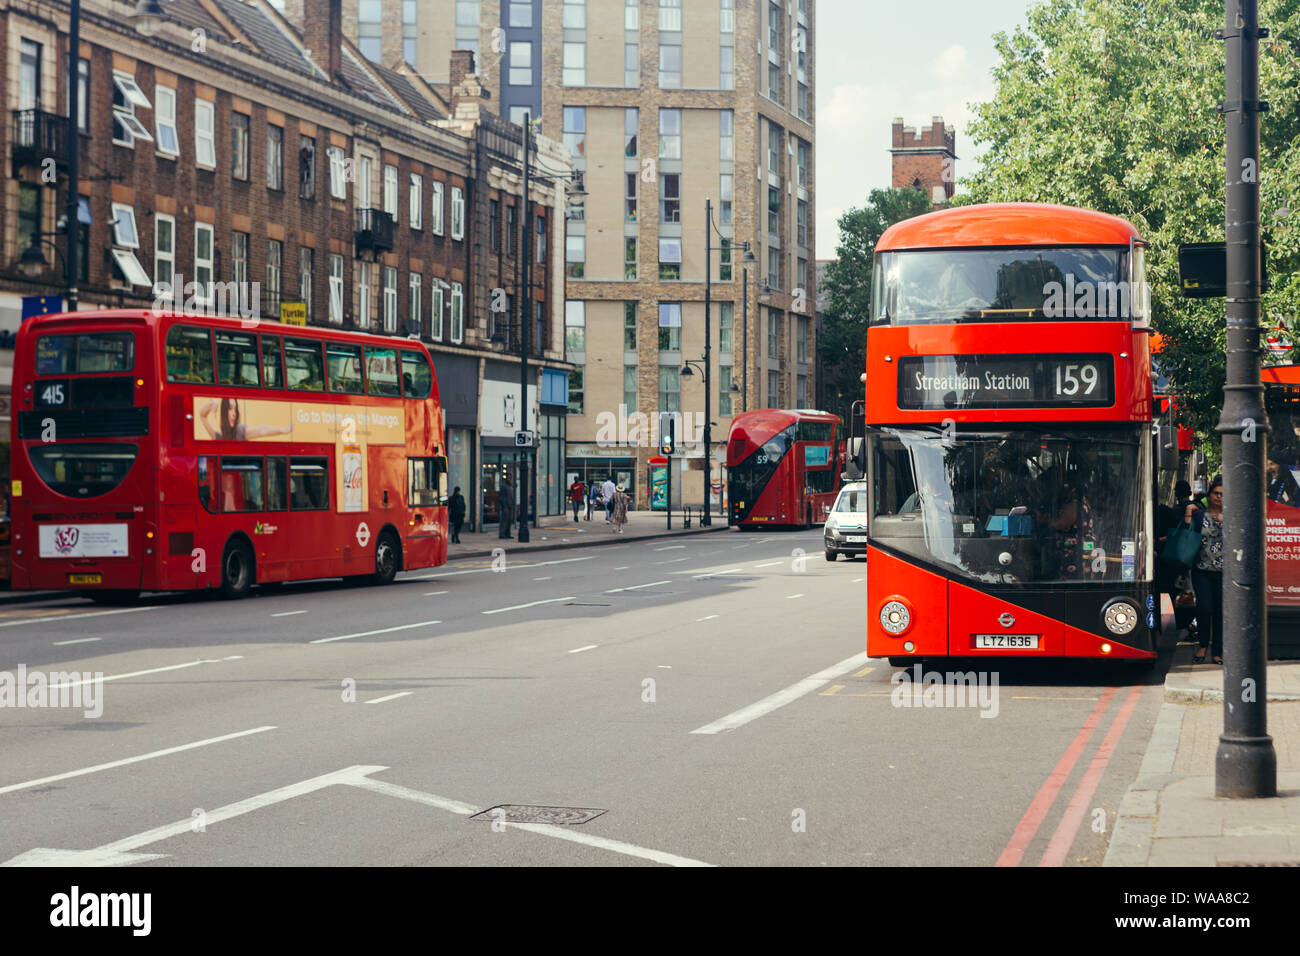 London / UK - July 16, 2019: Passengers getting on a red doubledecker bus towards Streatham Station on the Brixton Road in Lambeth Stock Photo